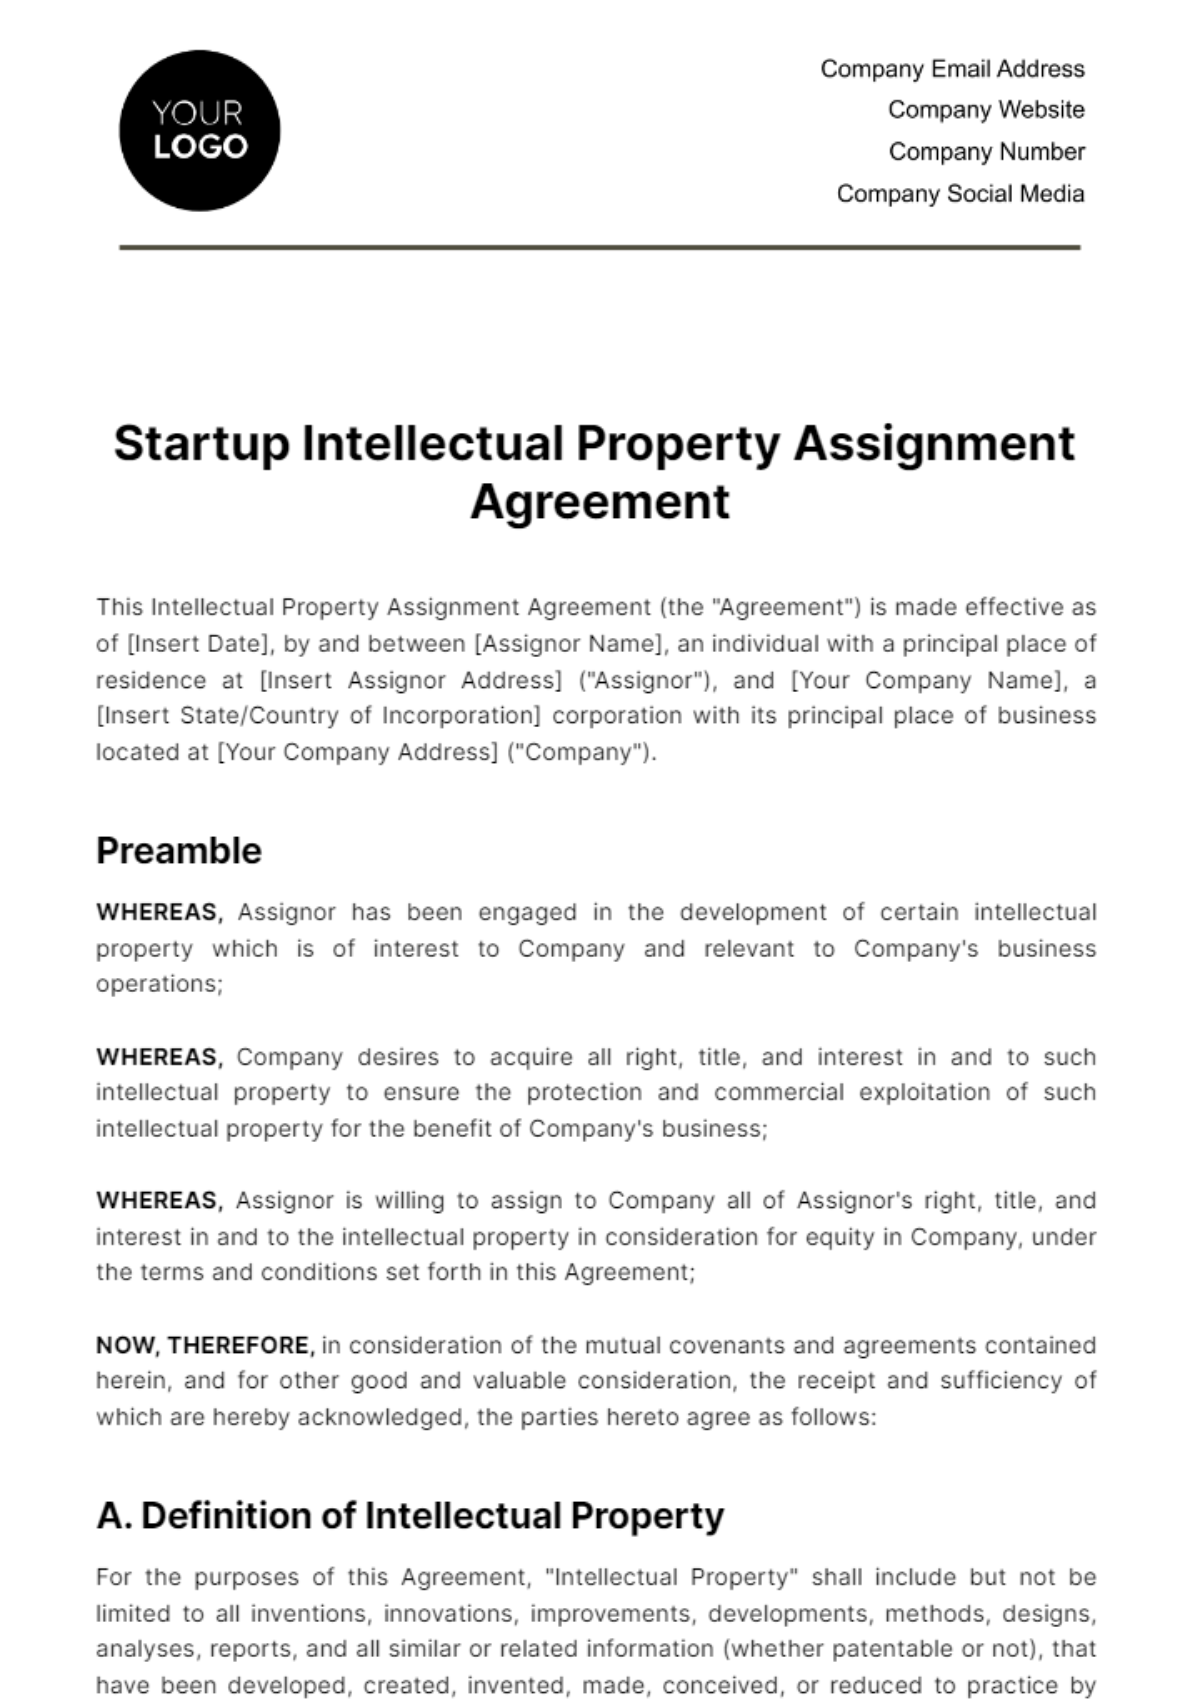 Free Startup Intellectual Property Assignment Agreement Template